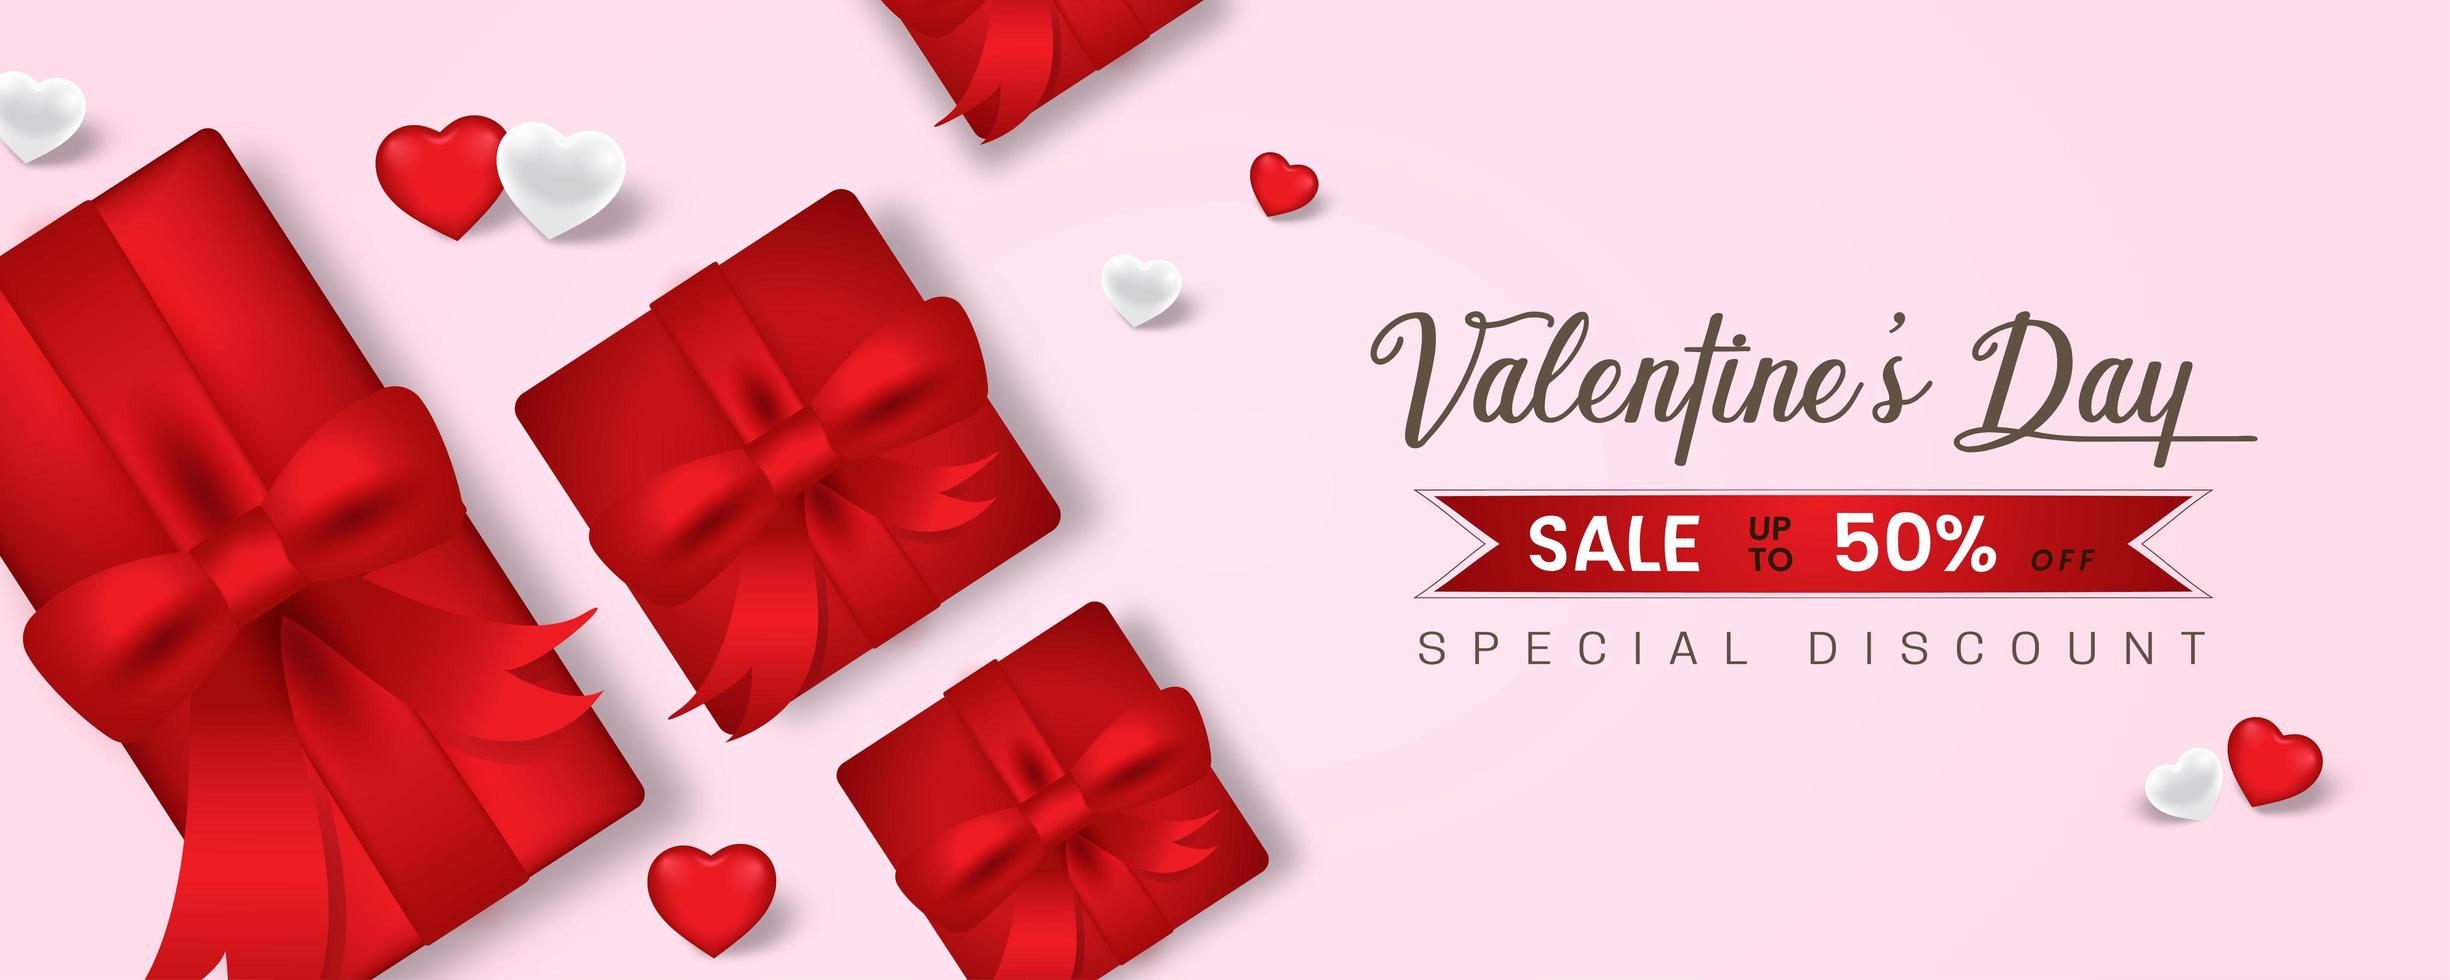 Promo Web Banner for Valentine's Day Sale. Lovely Pink Background color. vector